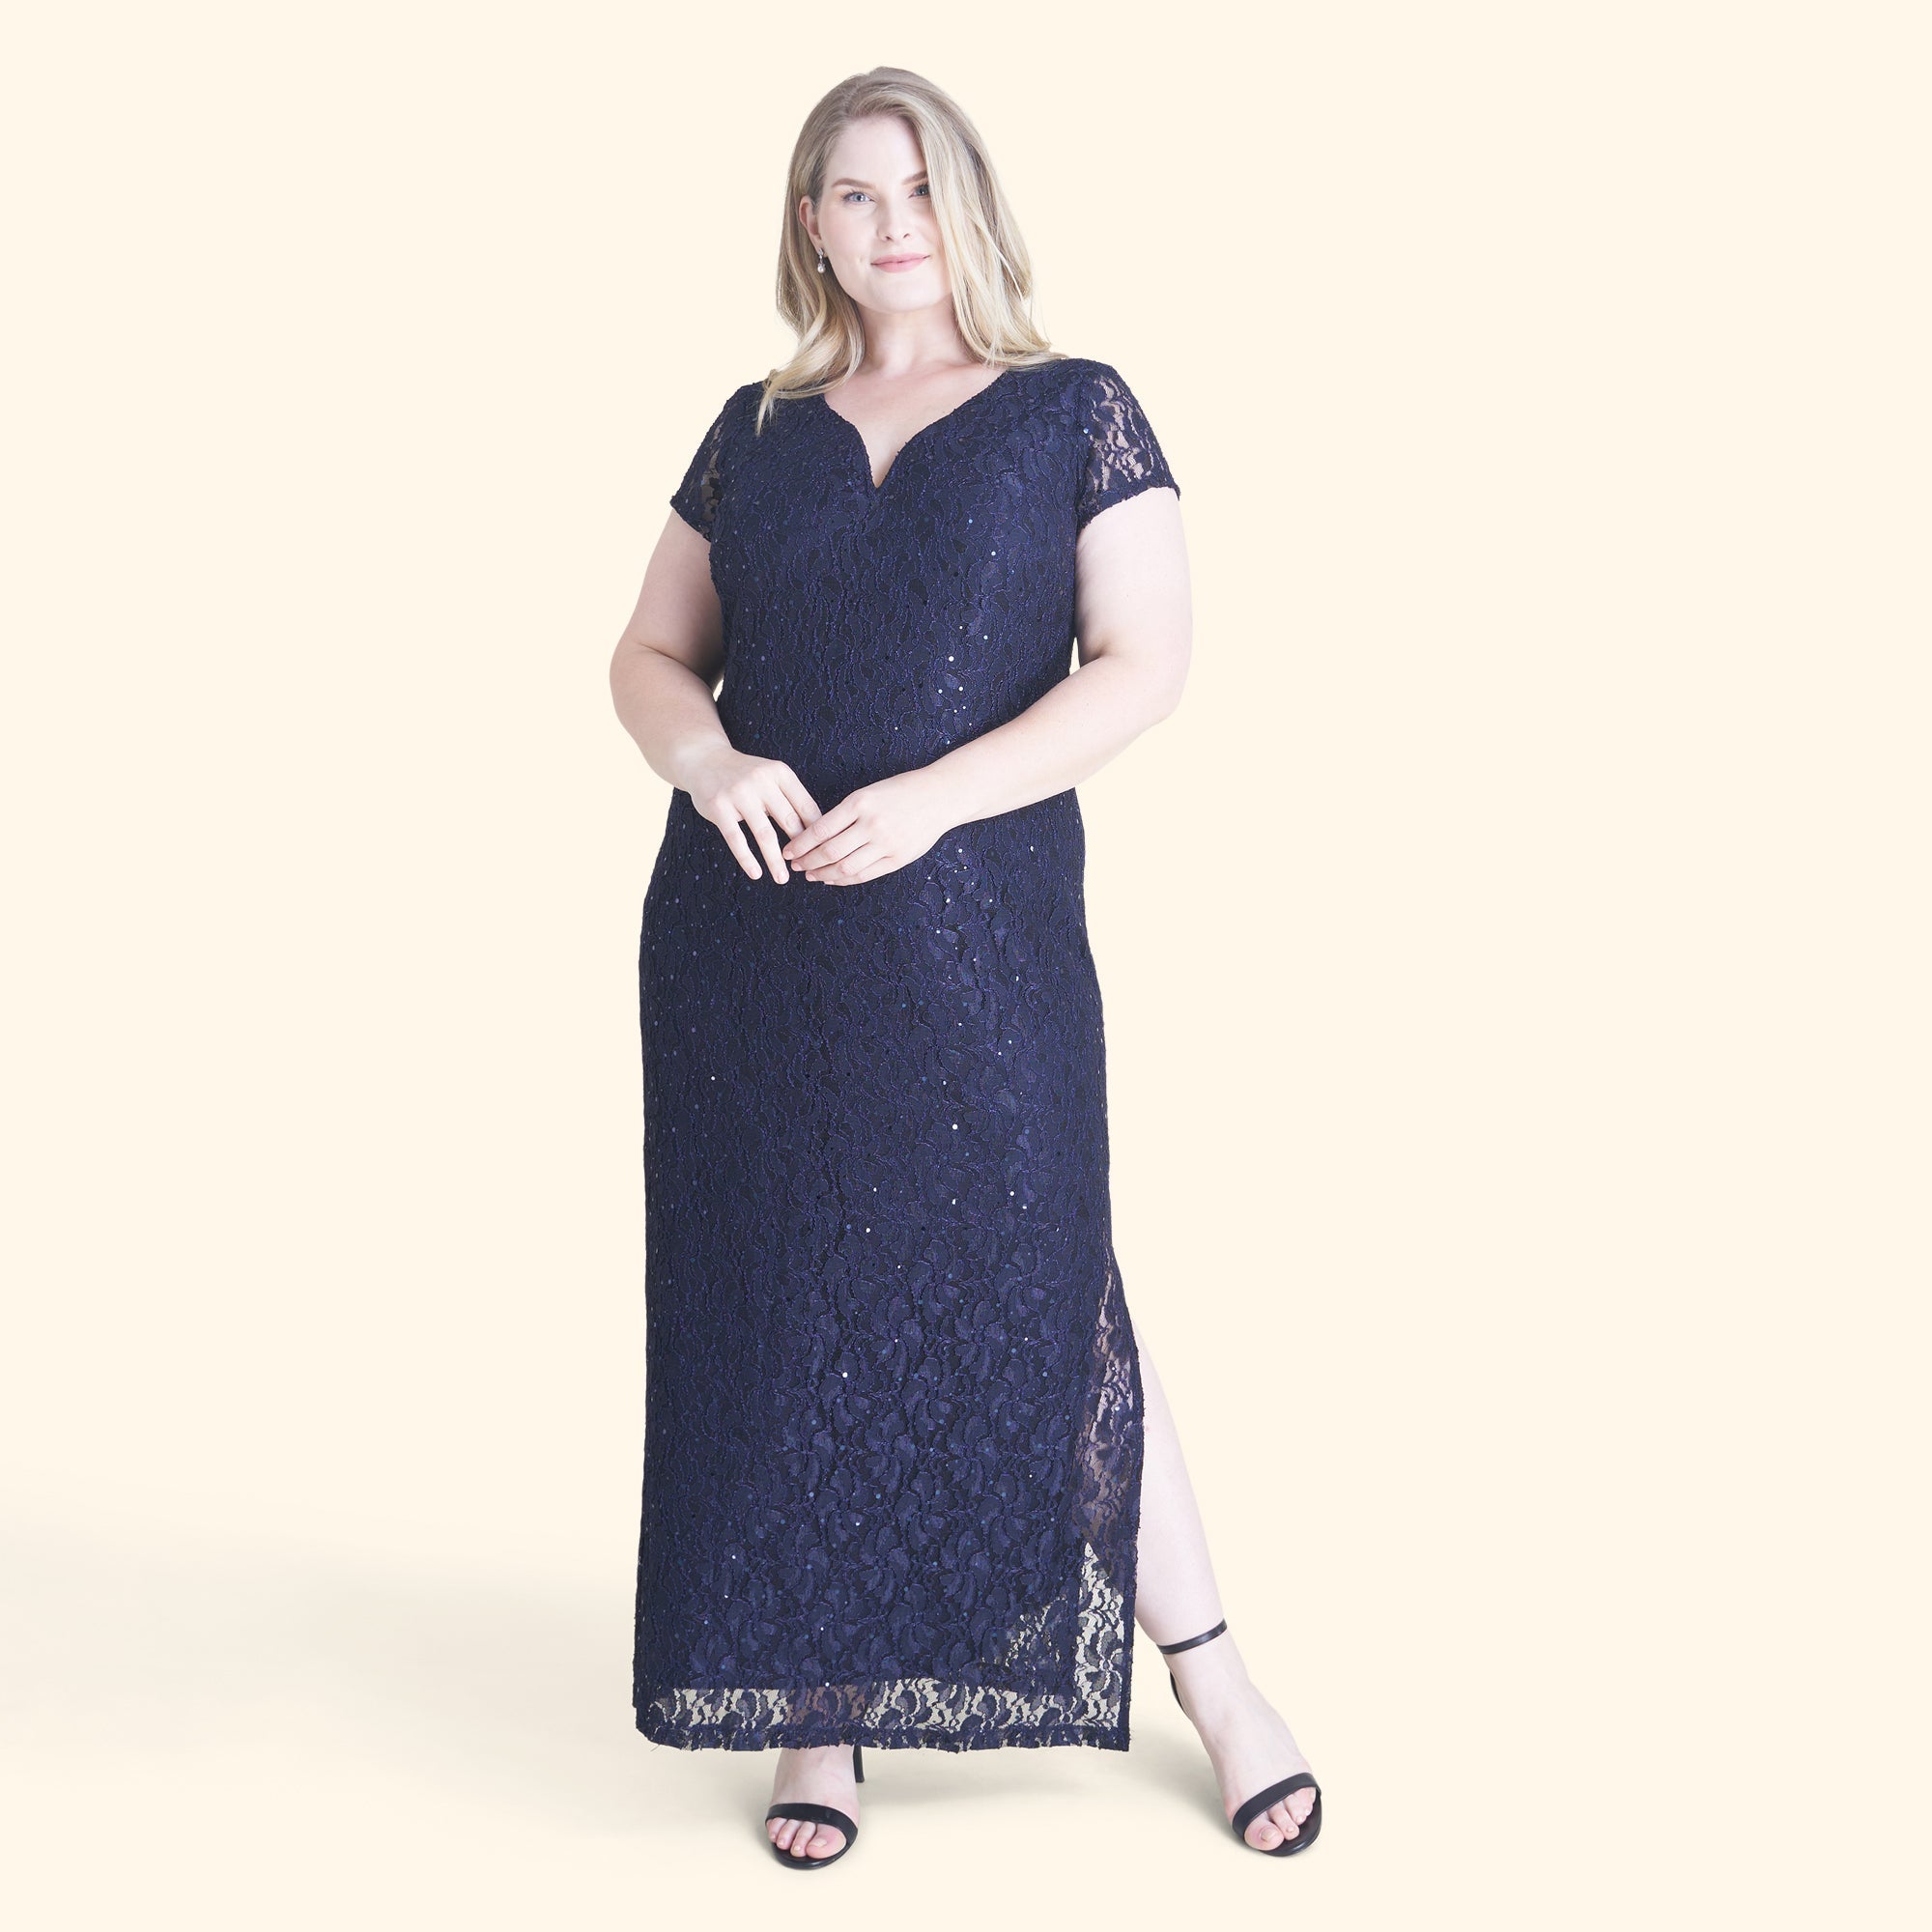 Woman posing wearing Navy Grace Navy Sequin Lace Dress from Connected Apparel